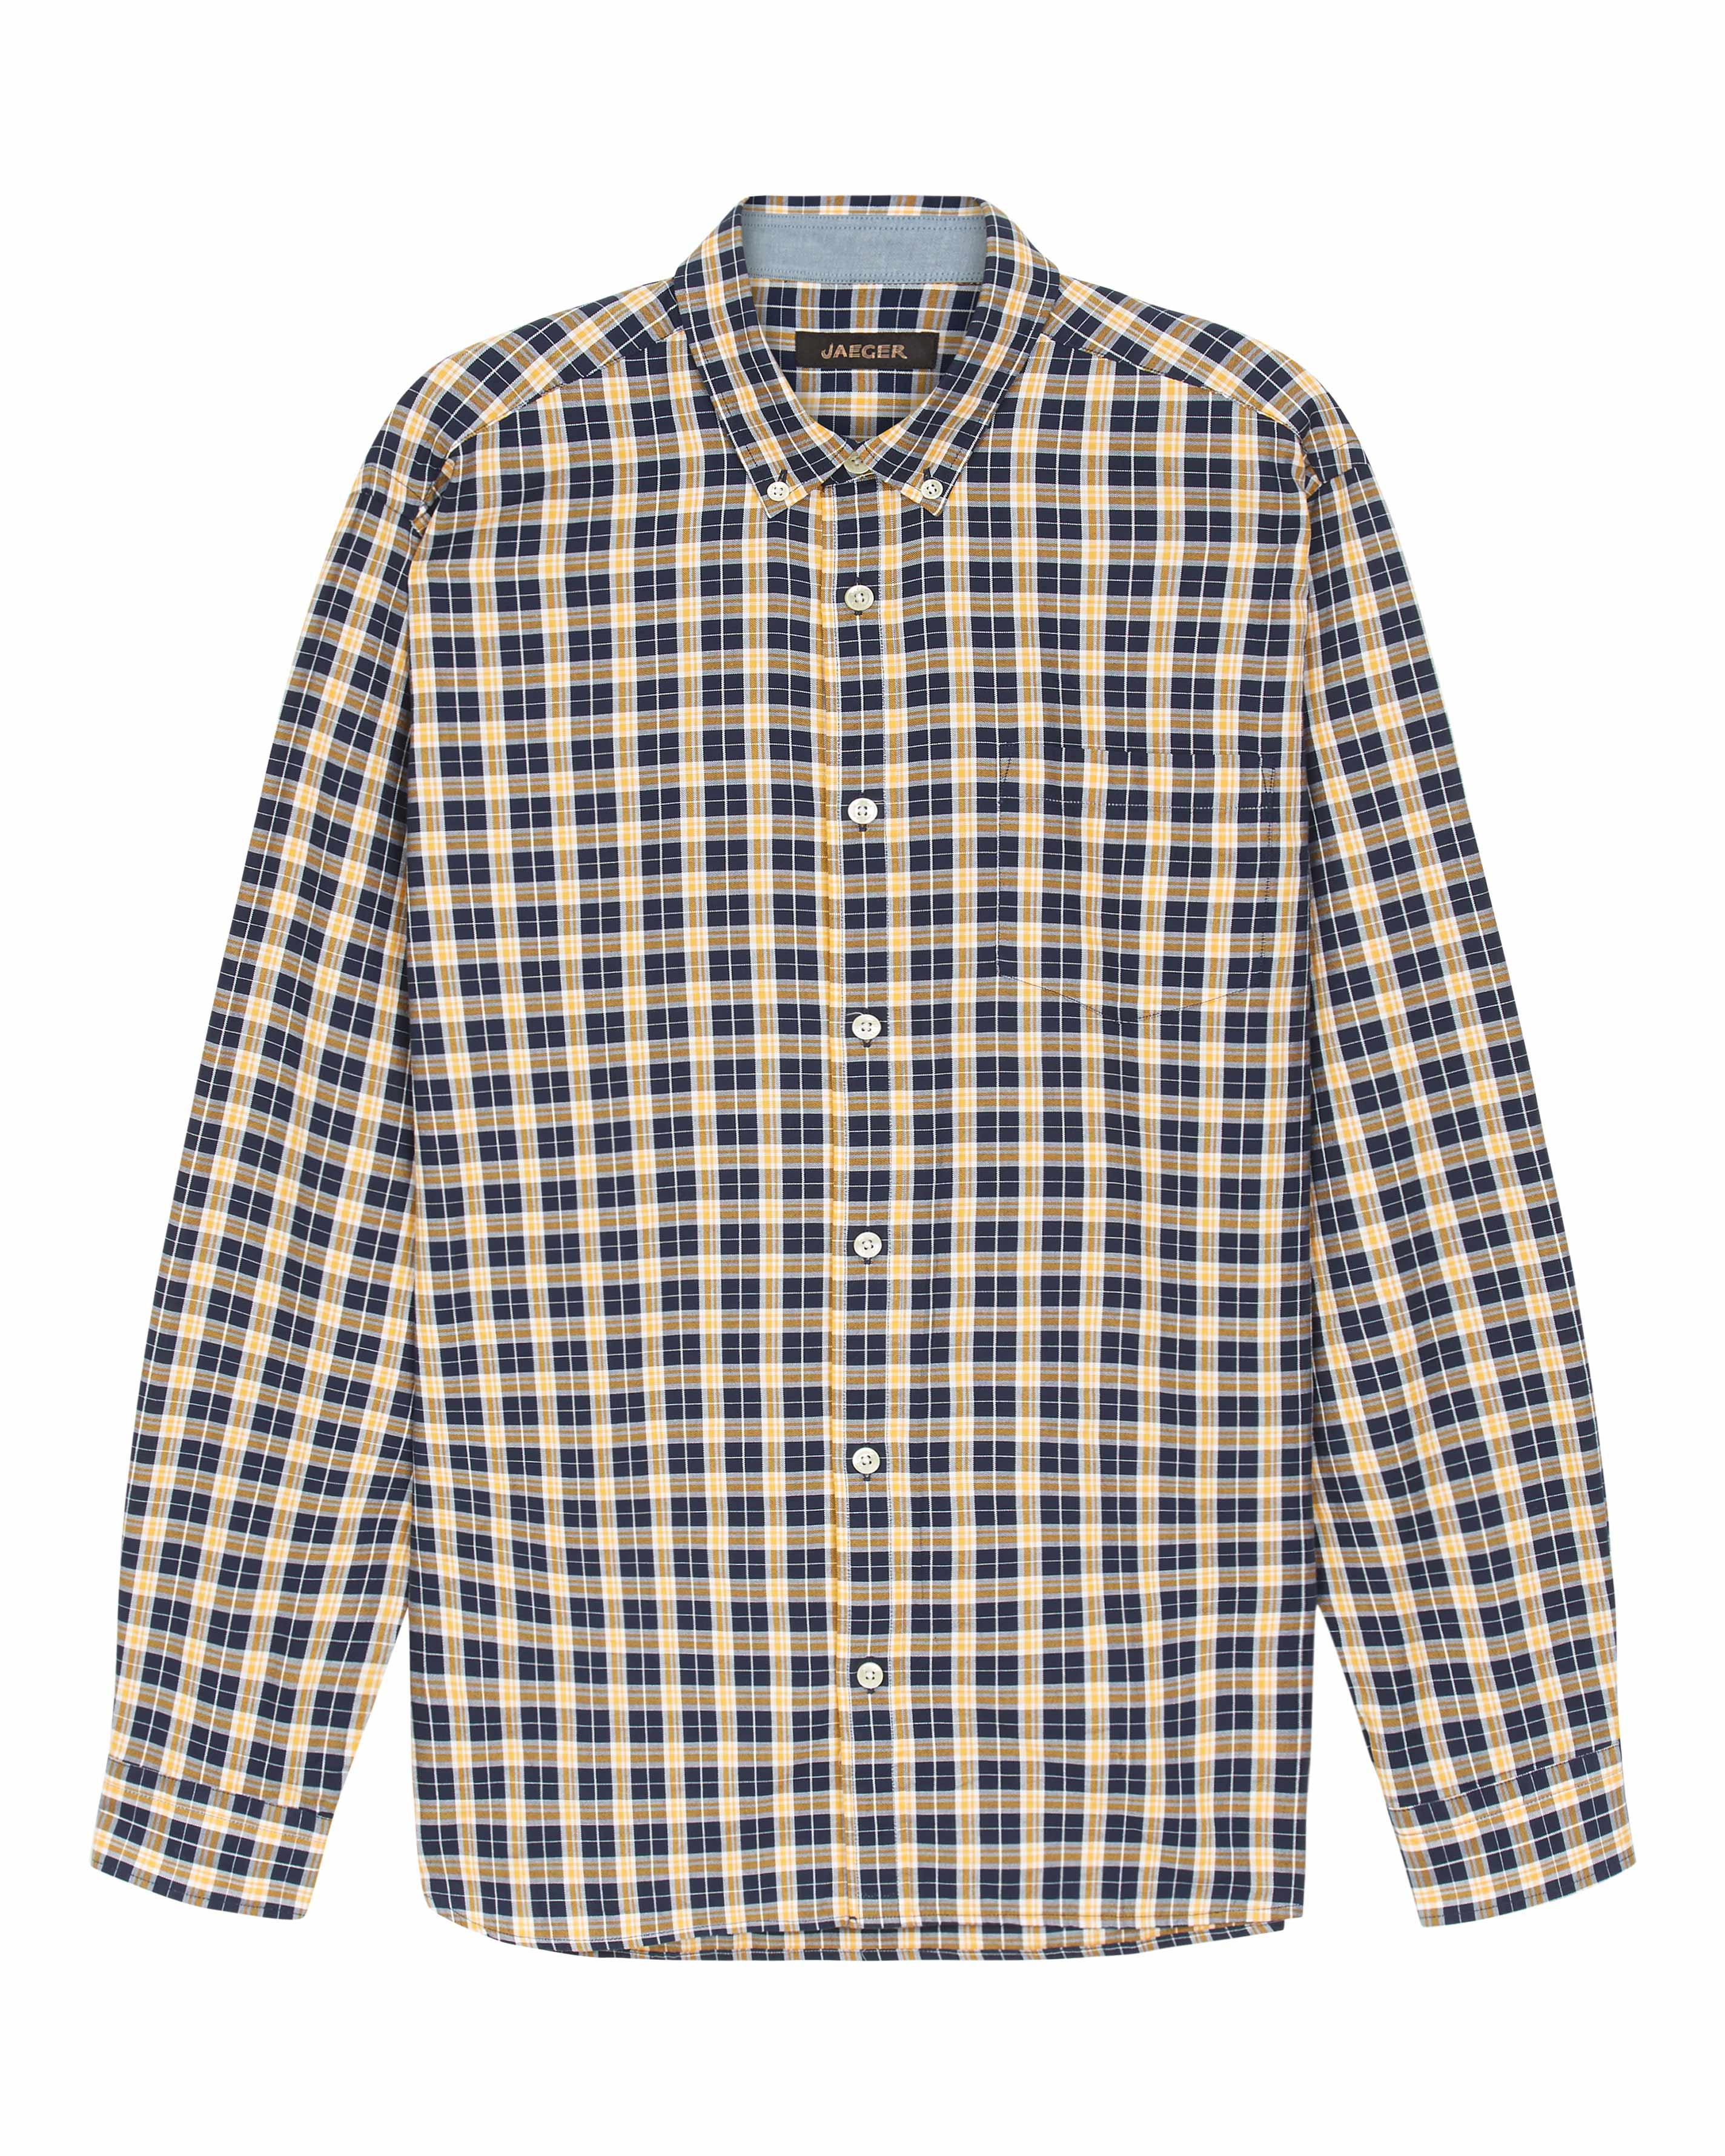 Lyst - Jaeger Casual Multi Check Shirt for Men